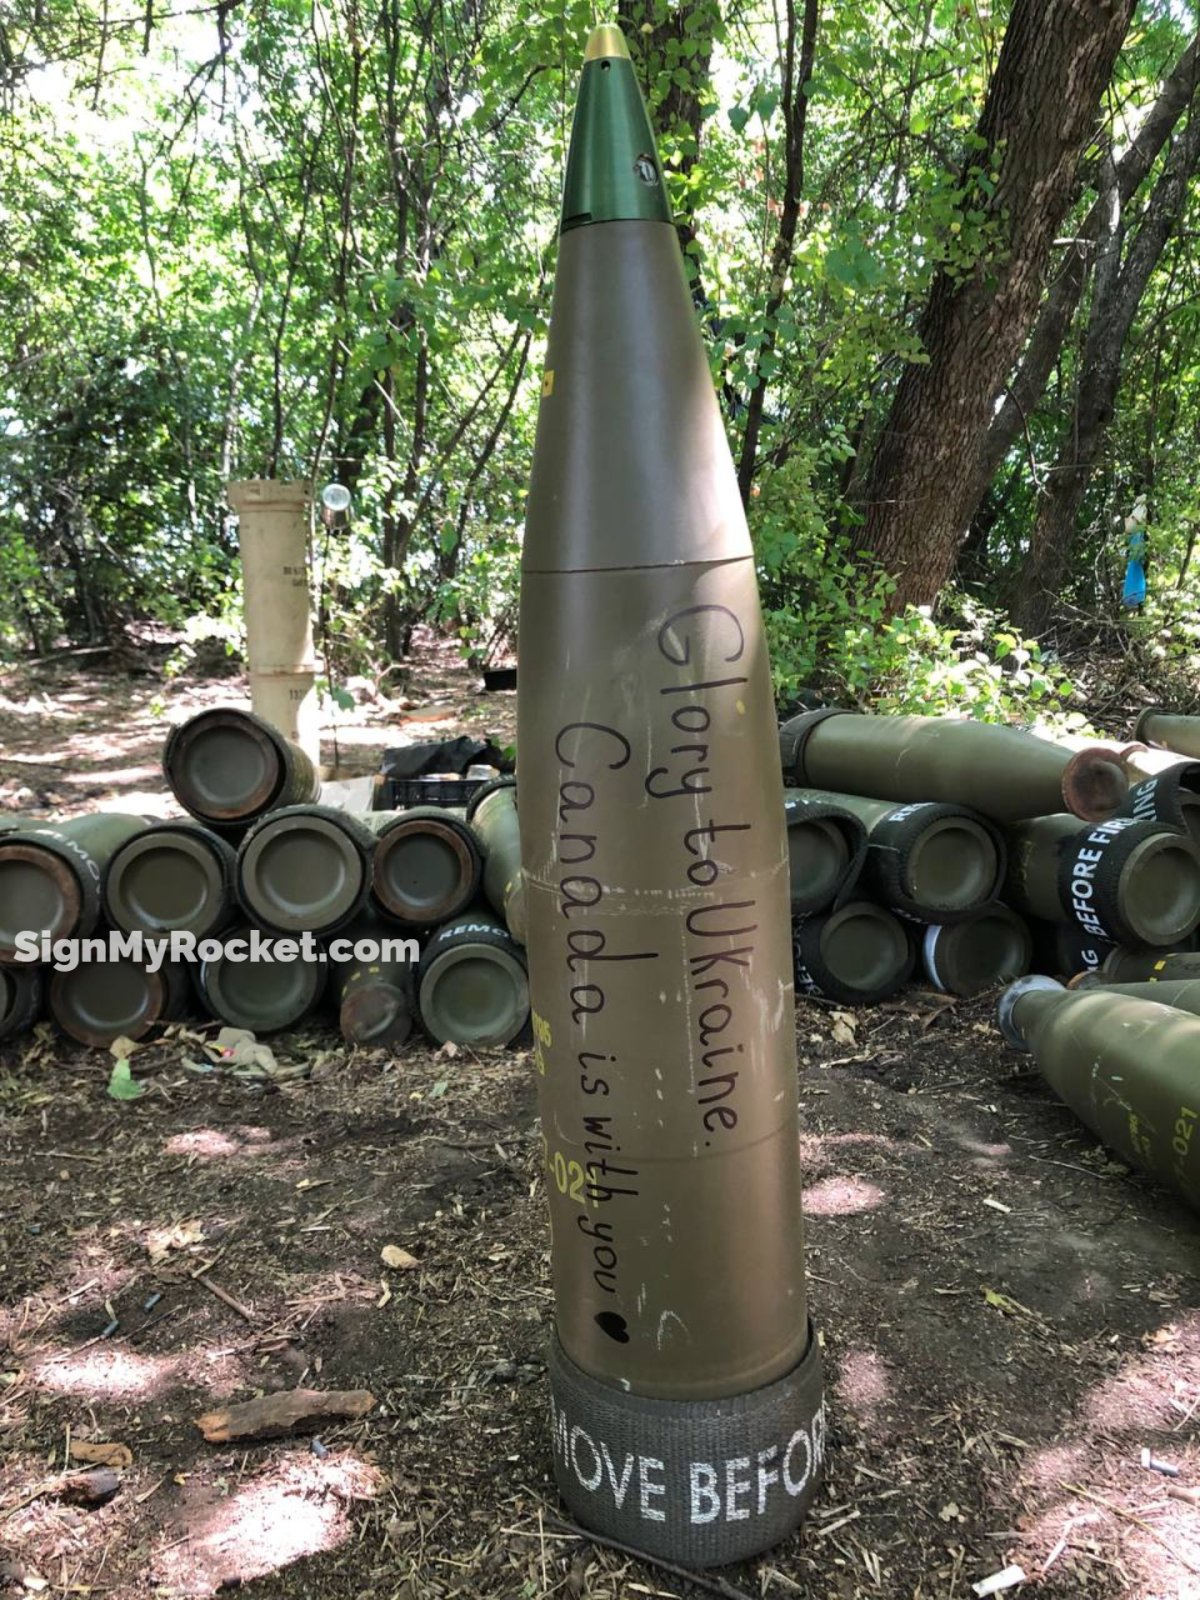 Ukrainian M777 howitzer shell with message from Canadian donor.